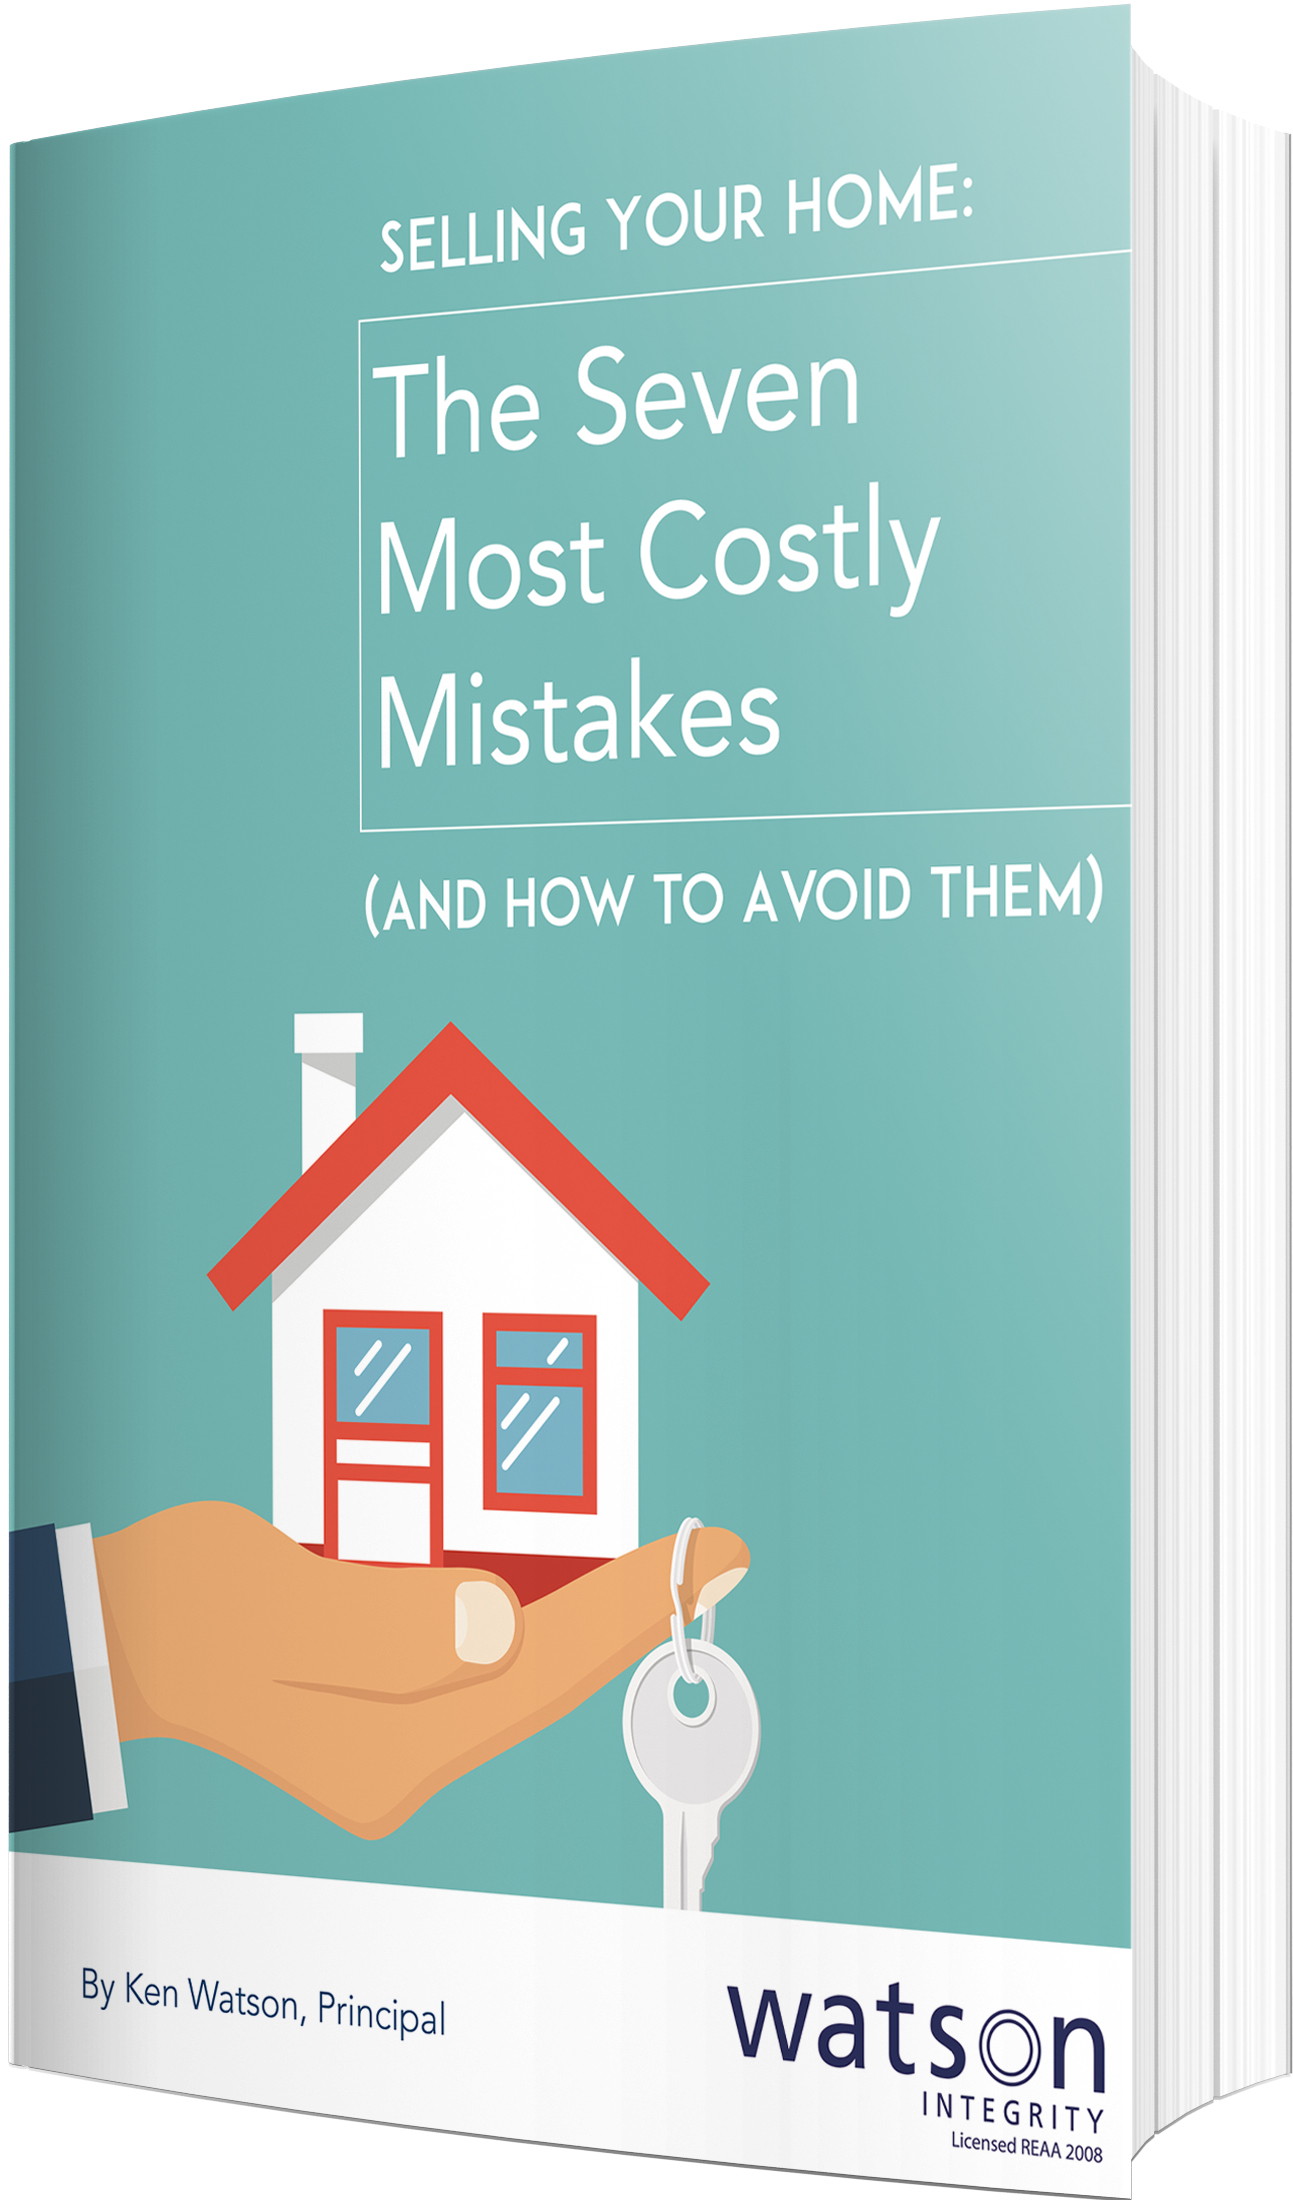 7 Most Costly Mistakes (and how to avoid them)